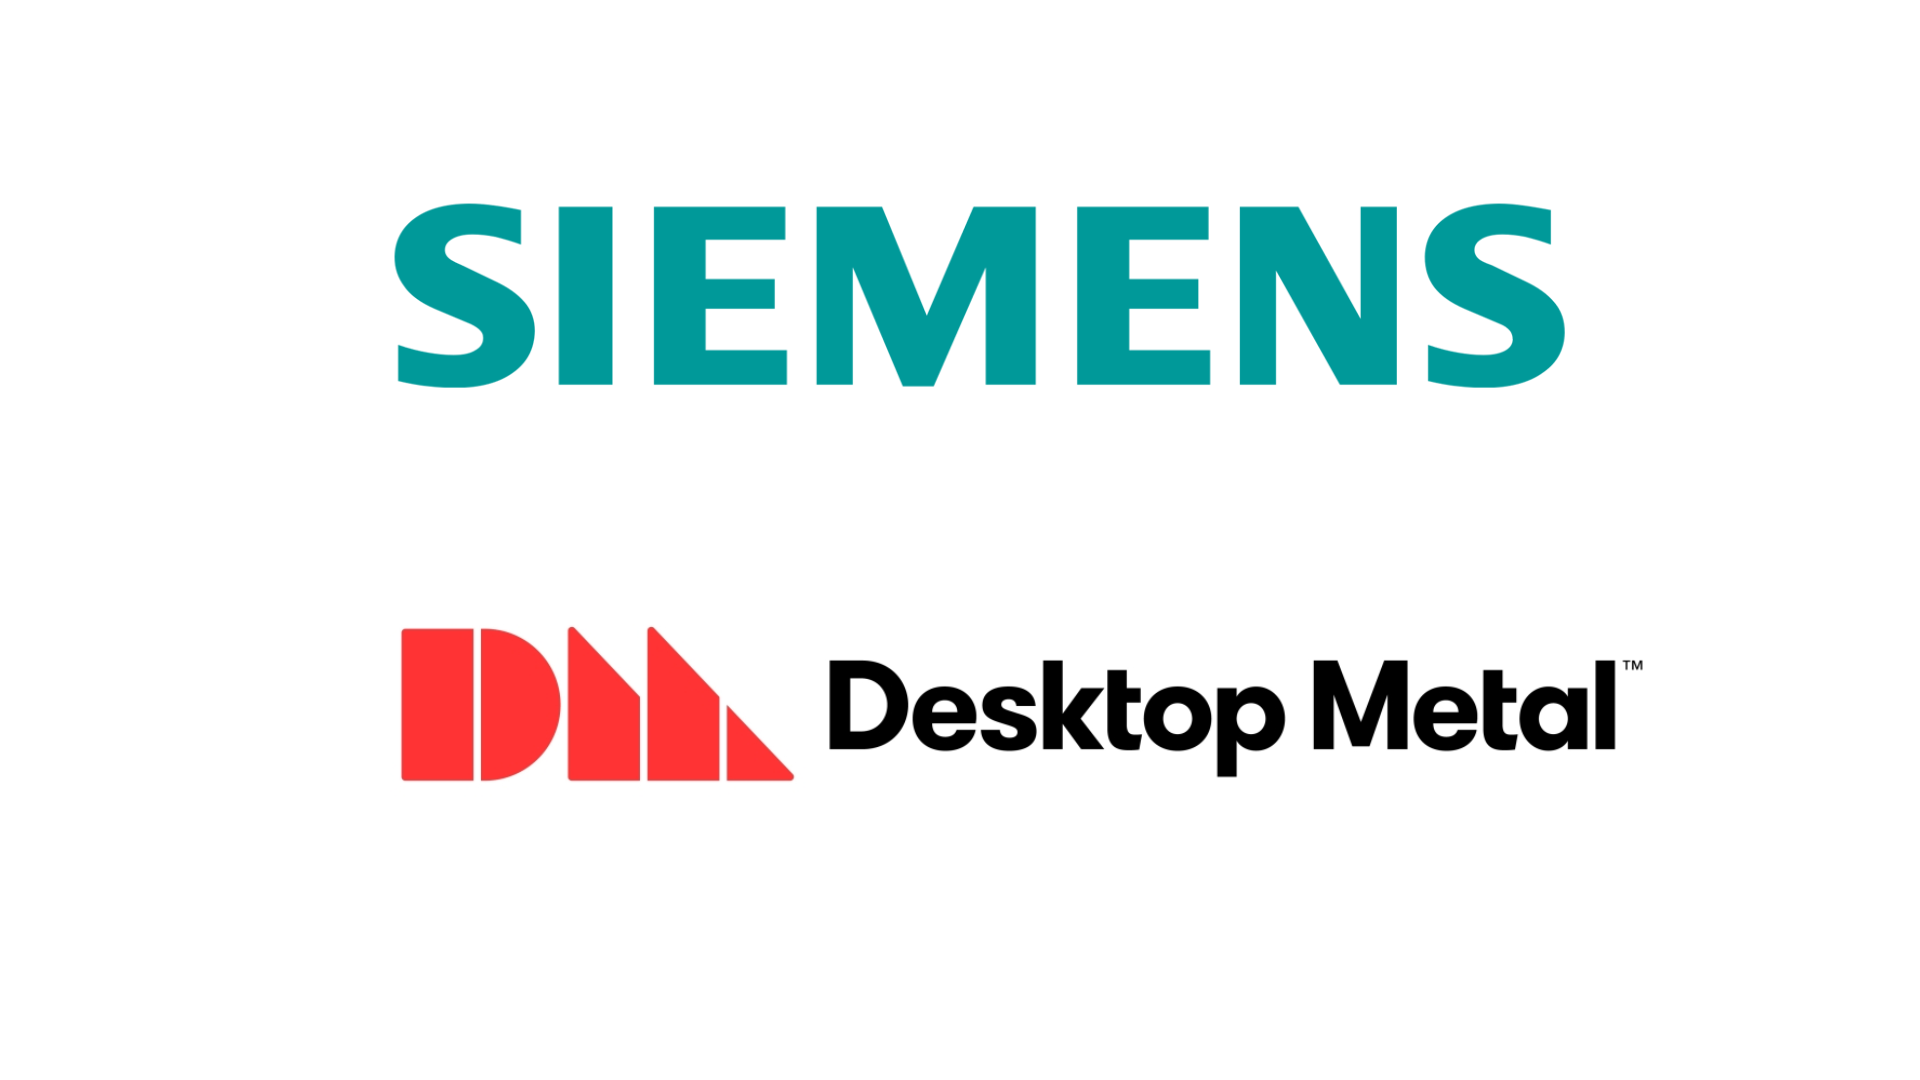 Siemens and Desktop Metal, Inc. announced a partnership to accelerate production applications of additive manufacturing for large manufacturers